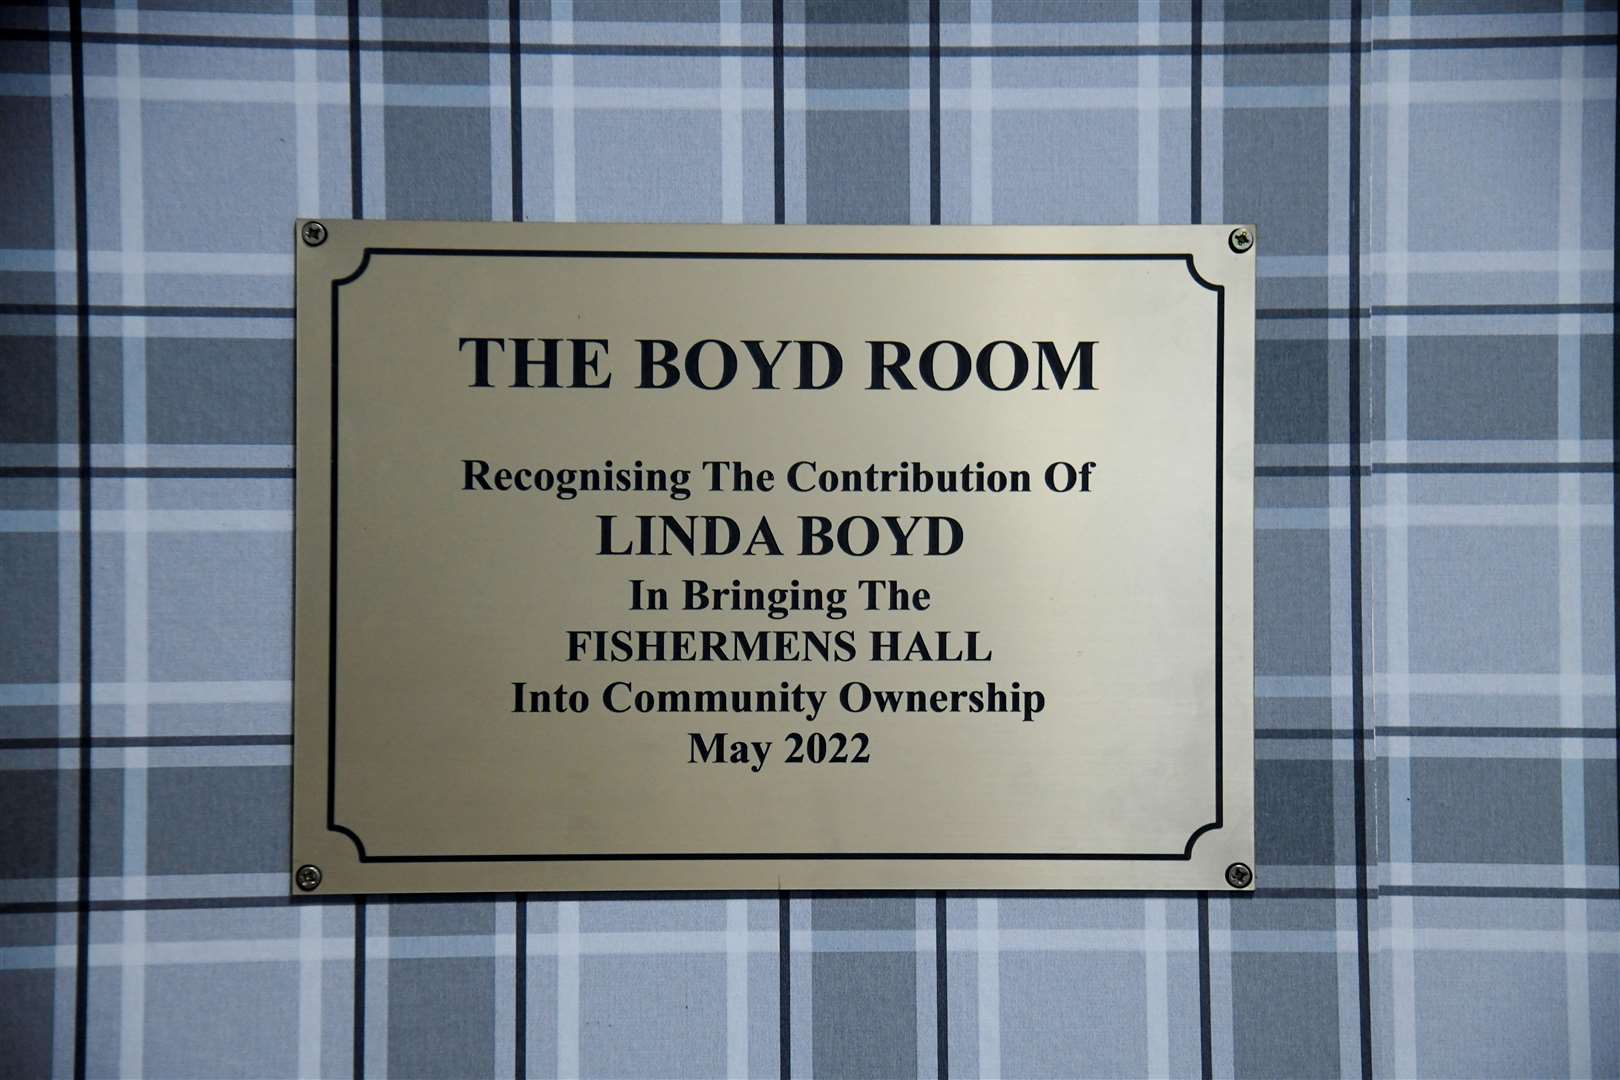 The commemorative plaque in honour of Linda Boyd. Picture: Beth Taylor